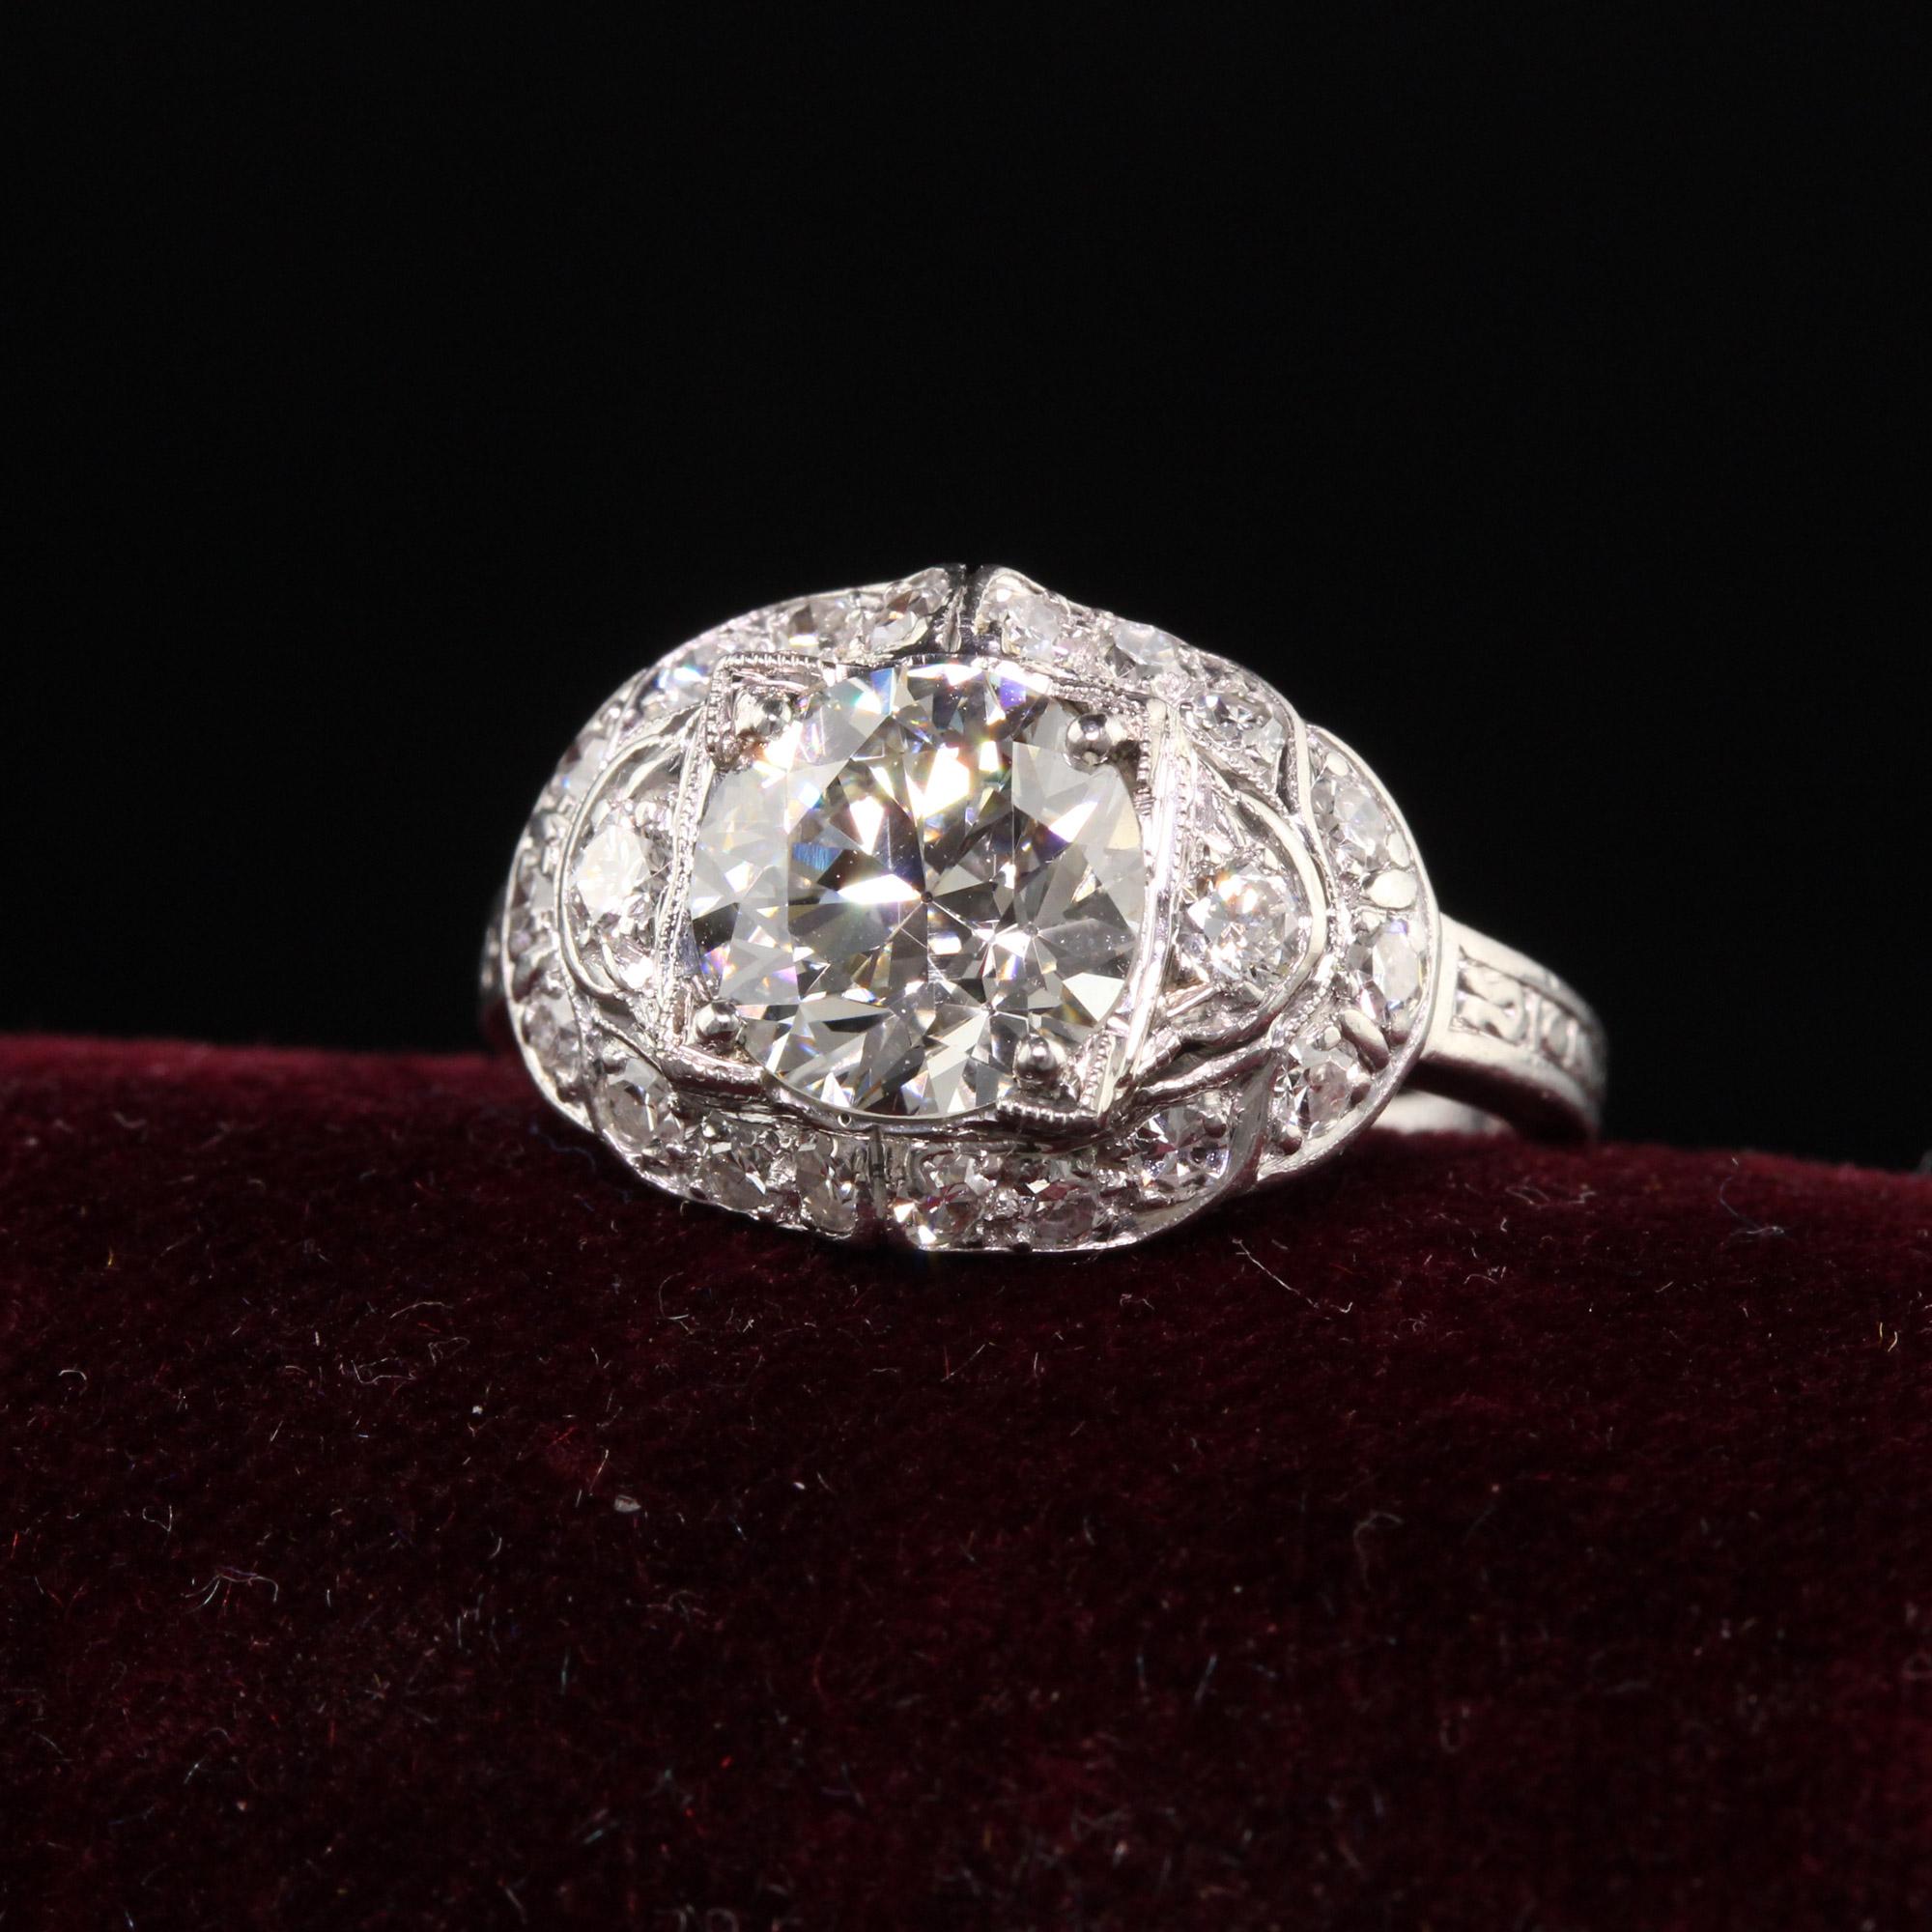 Beautiful Antique Art Deco Platinum Old European Diamond Engagement Ring. This gorgeous engagement ring is crafted in platinum. The center holds a beautiful old european cut diamond in a gorgeous Art Deco mounting with a beautiful design.

Item